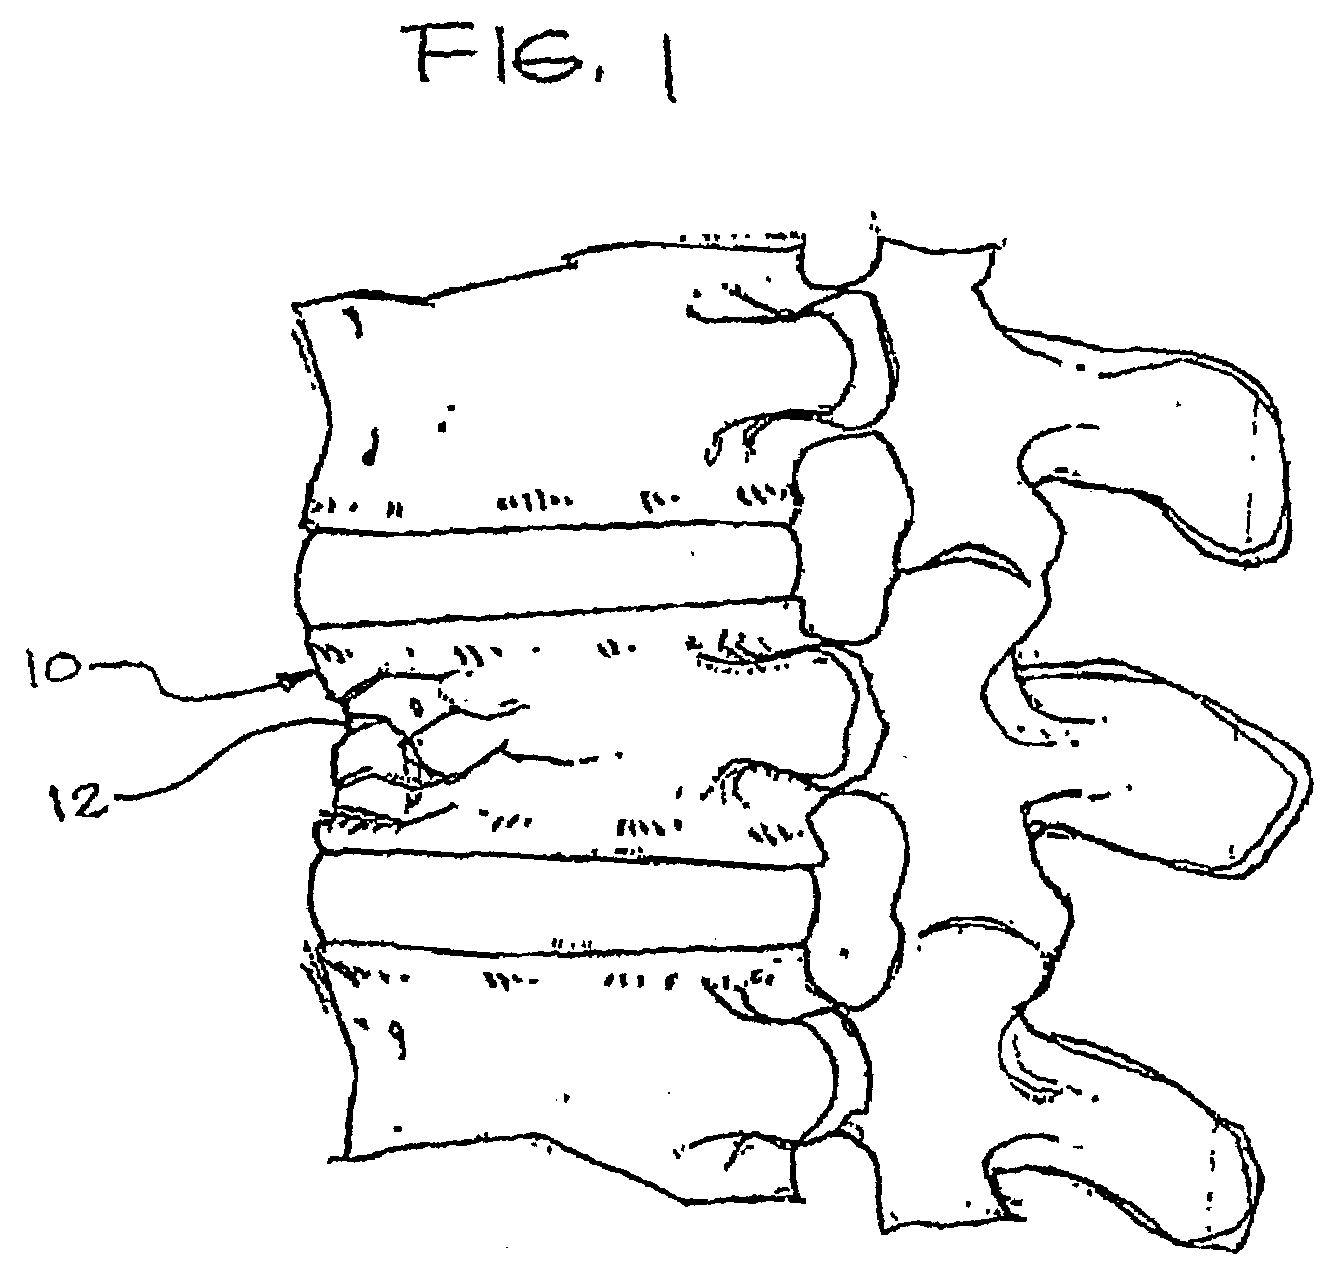 Expandable porous mesh bag device and methods of use for reduction, filling, fixation, and supporting of bone